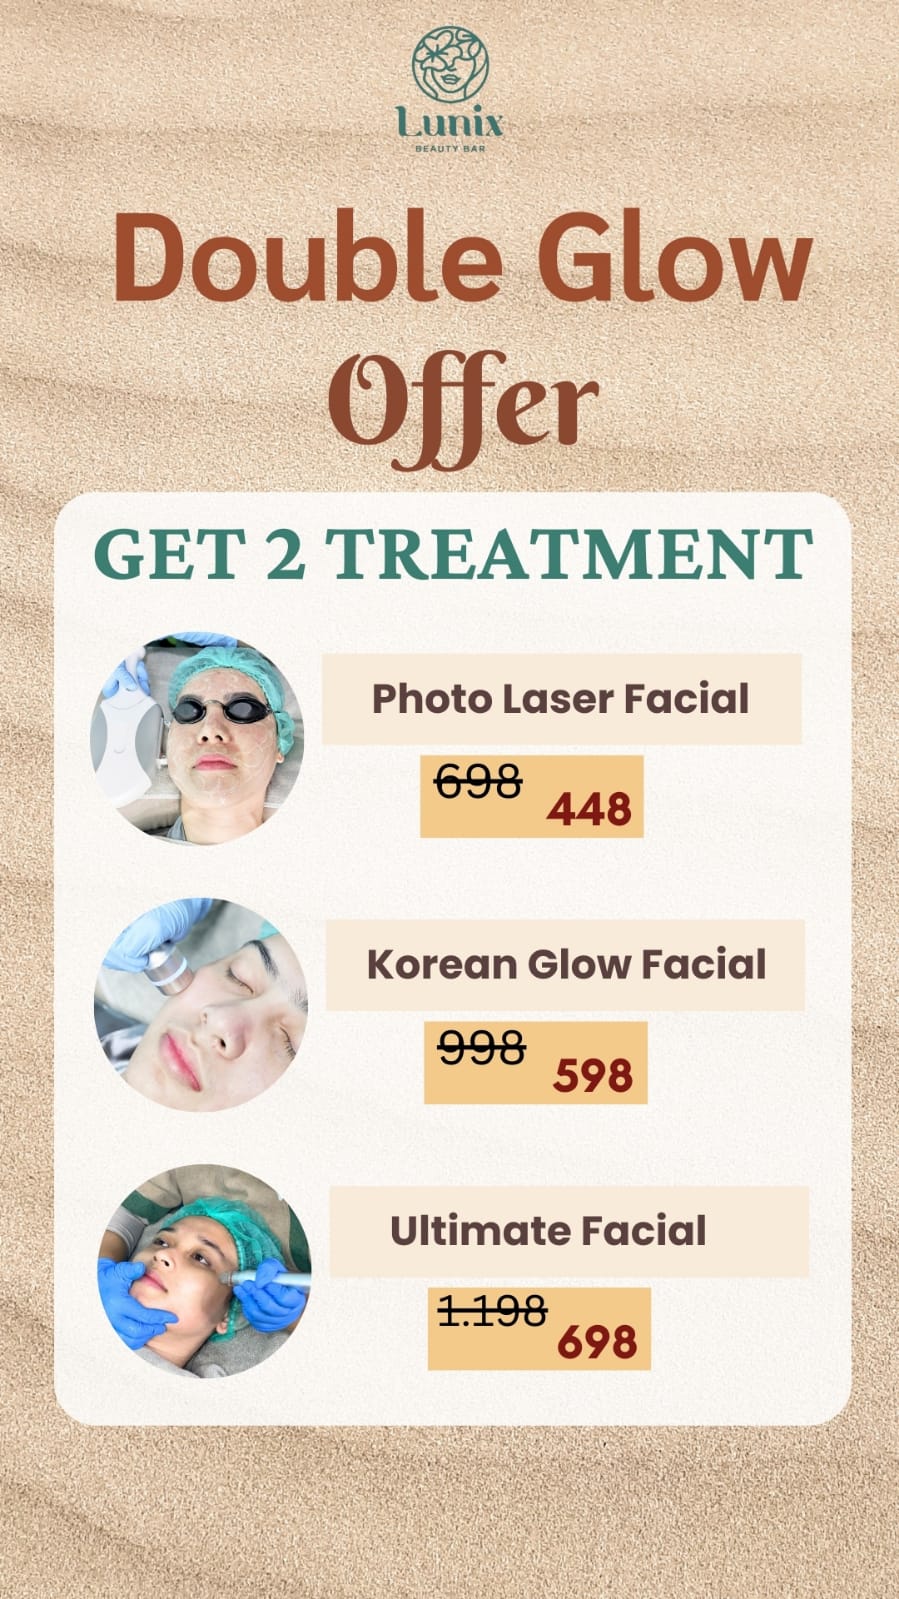 DOUBLE GLOW OFFER